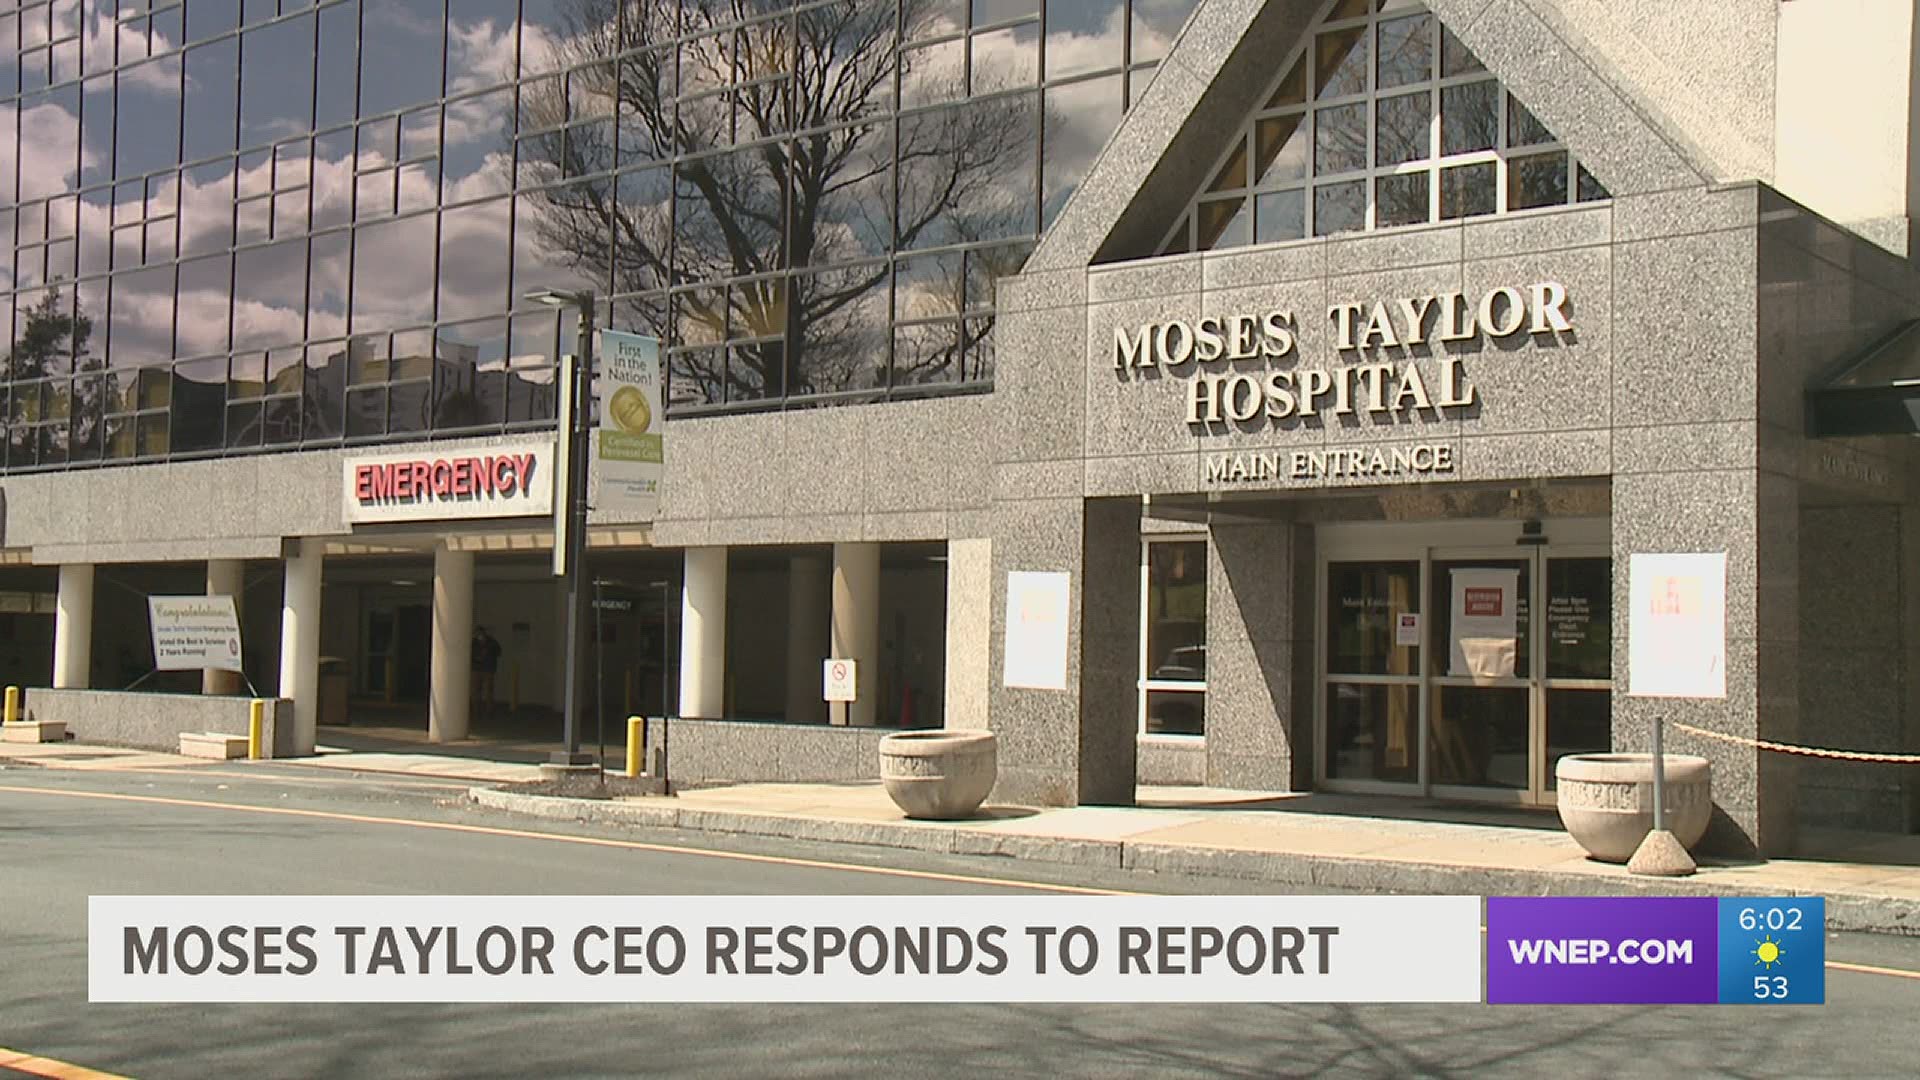 The CEO of Moses Taylor Hospital in Scranton is speaking out after a report from the Washington Post came out accusing the hospital of risking patients with COVID-19